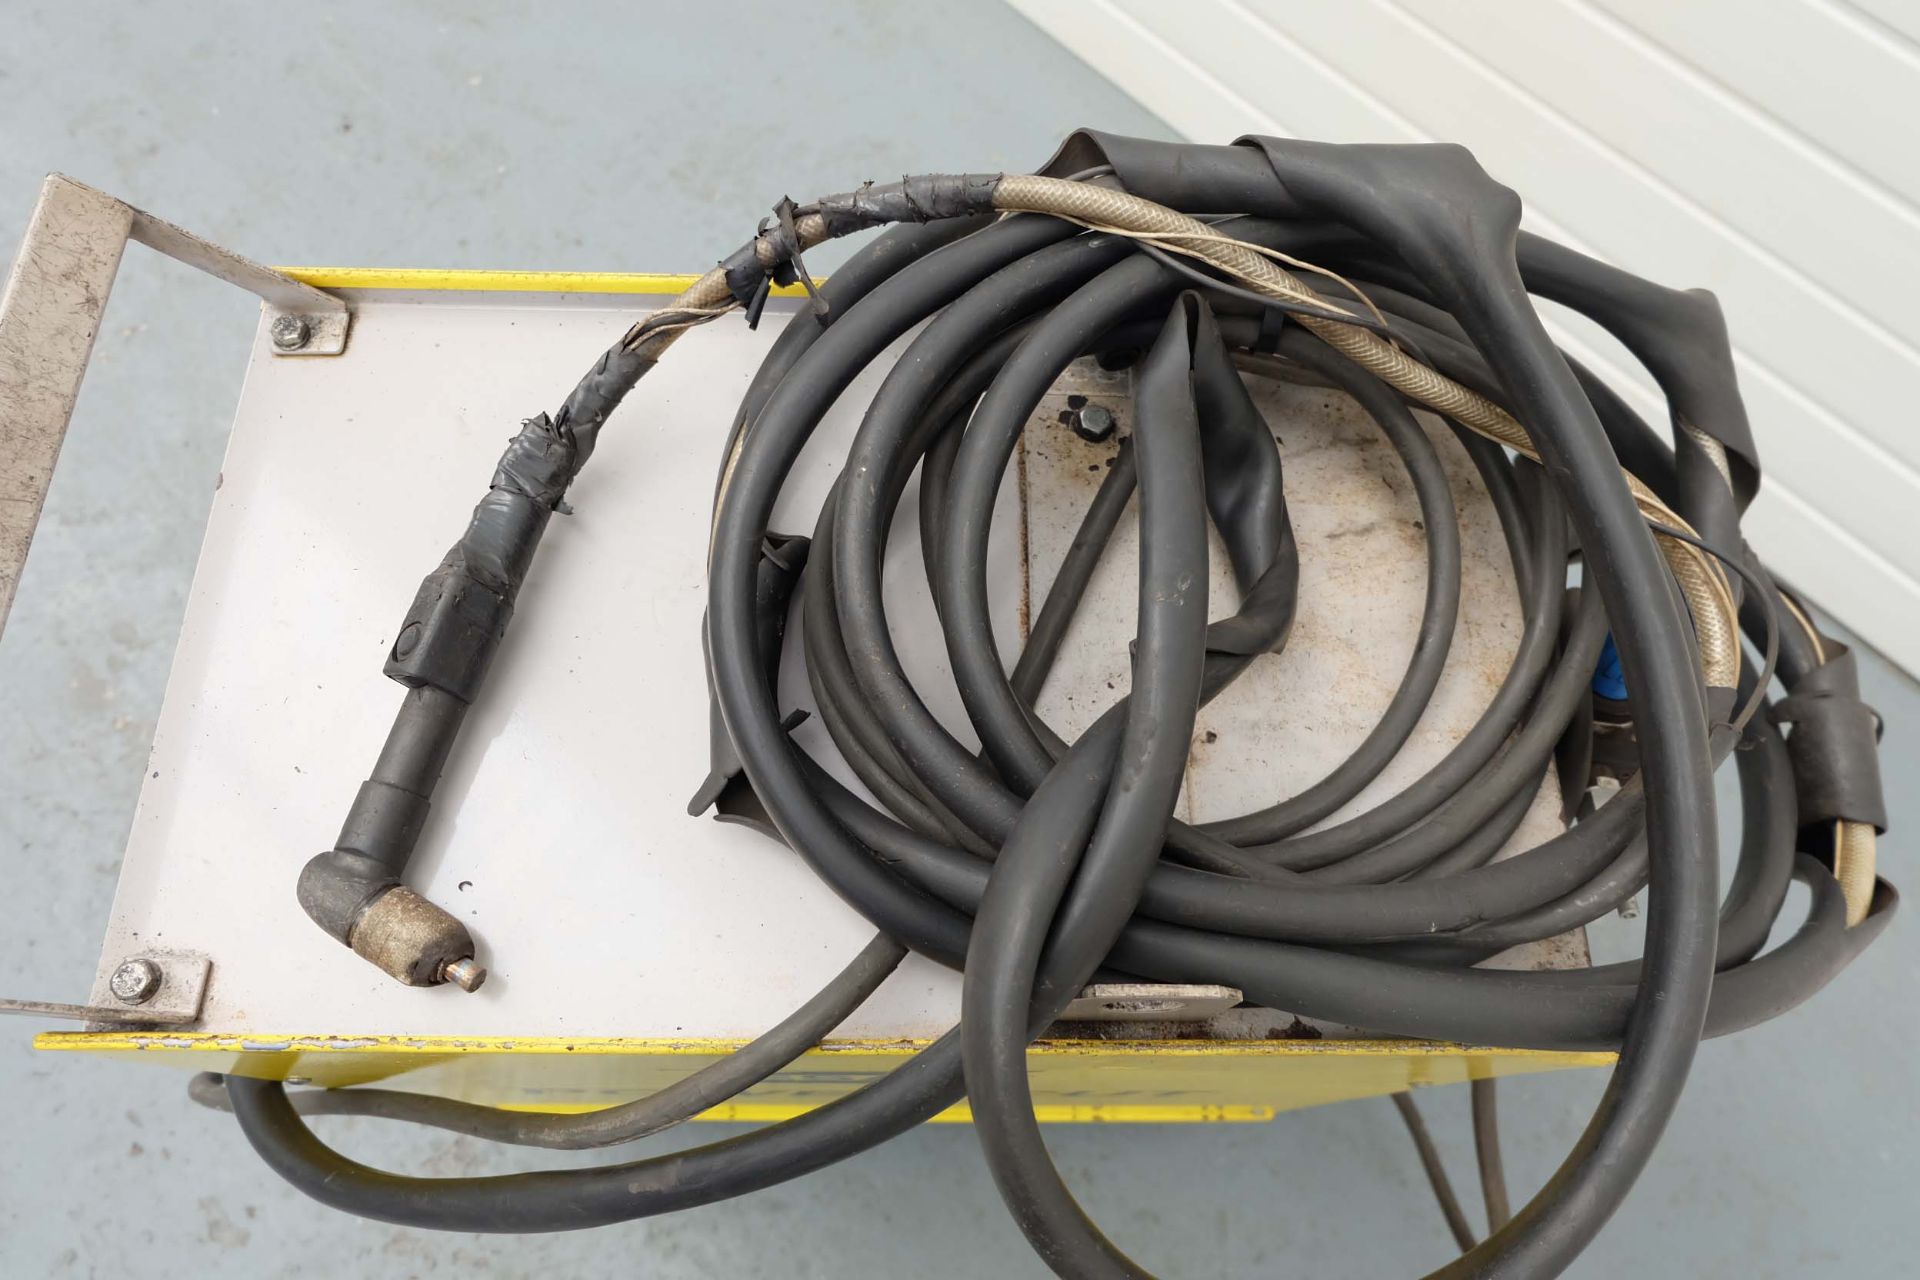 ESAB LPH 50 Mobile Mig Welding Set. 50 Amp @ 60% Duty Cycle. 30 Amp @ 100% Duty Cycle. - Image 4 of 6